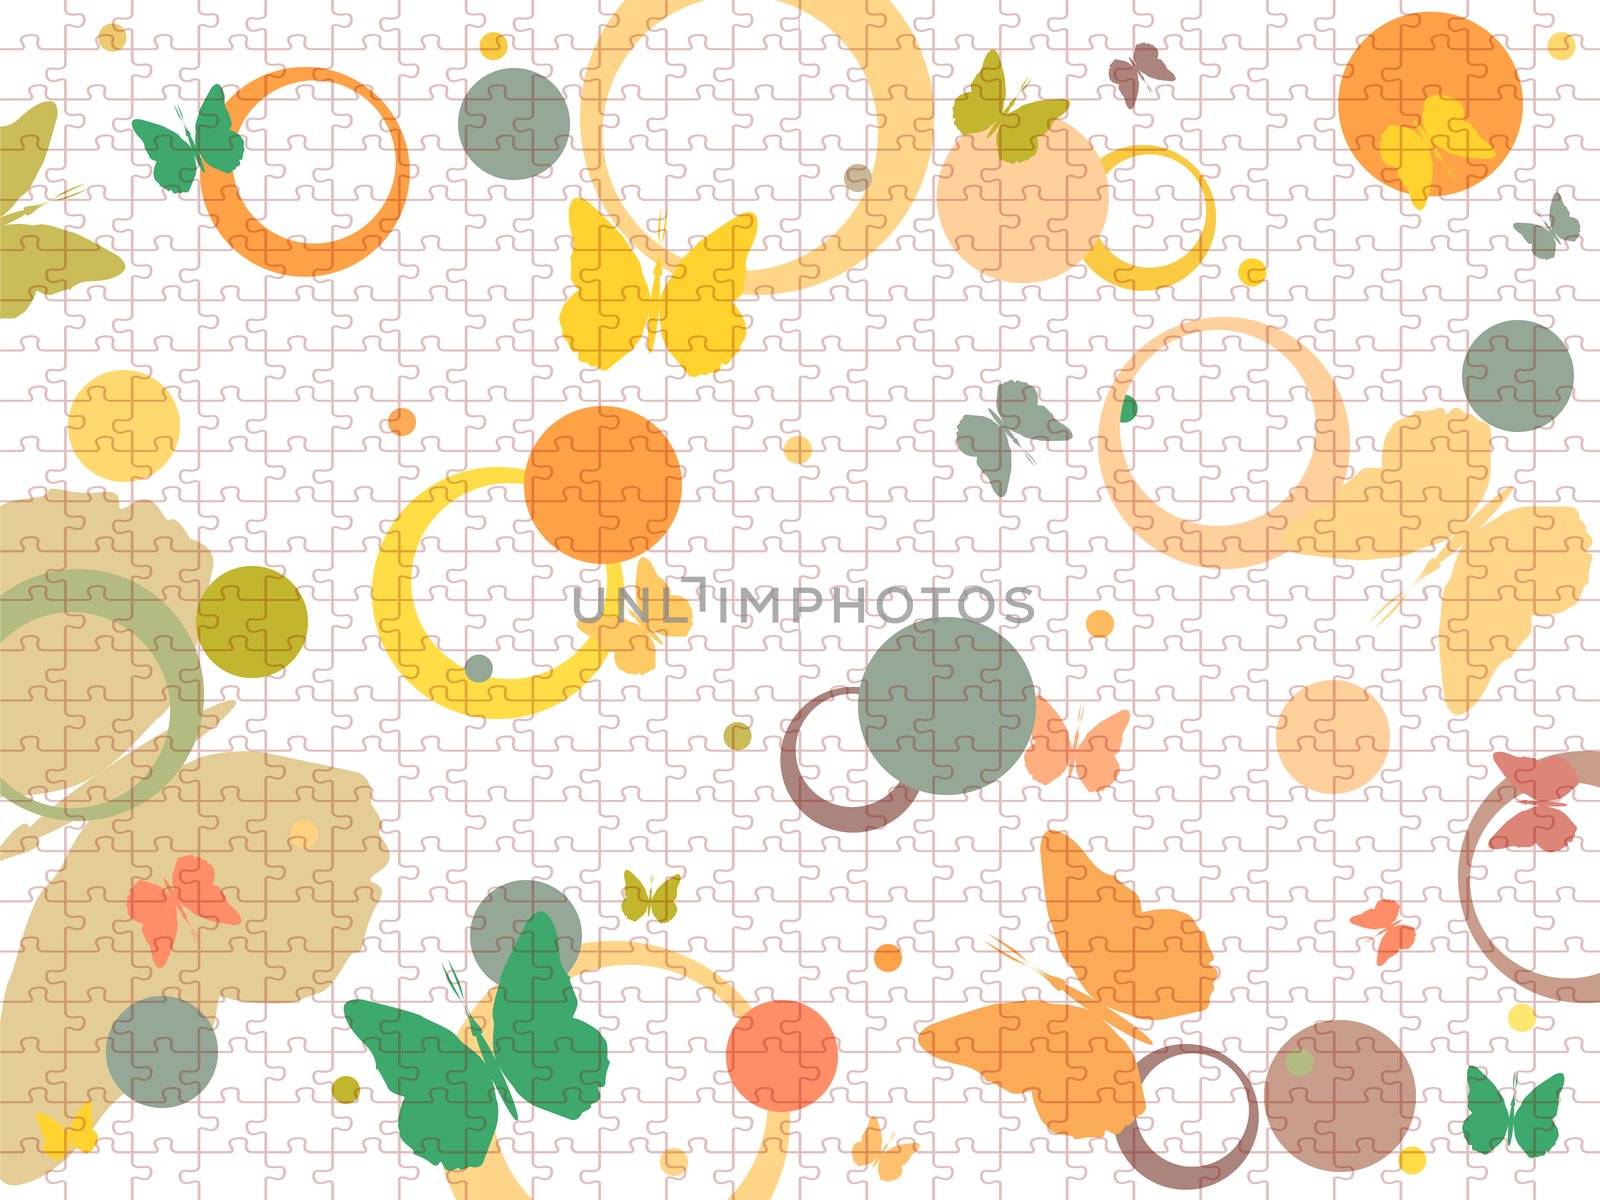 butterflies and bubbles puzzle composition, abstract vector art illustration